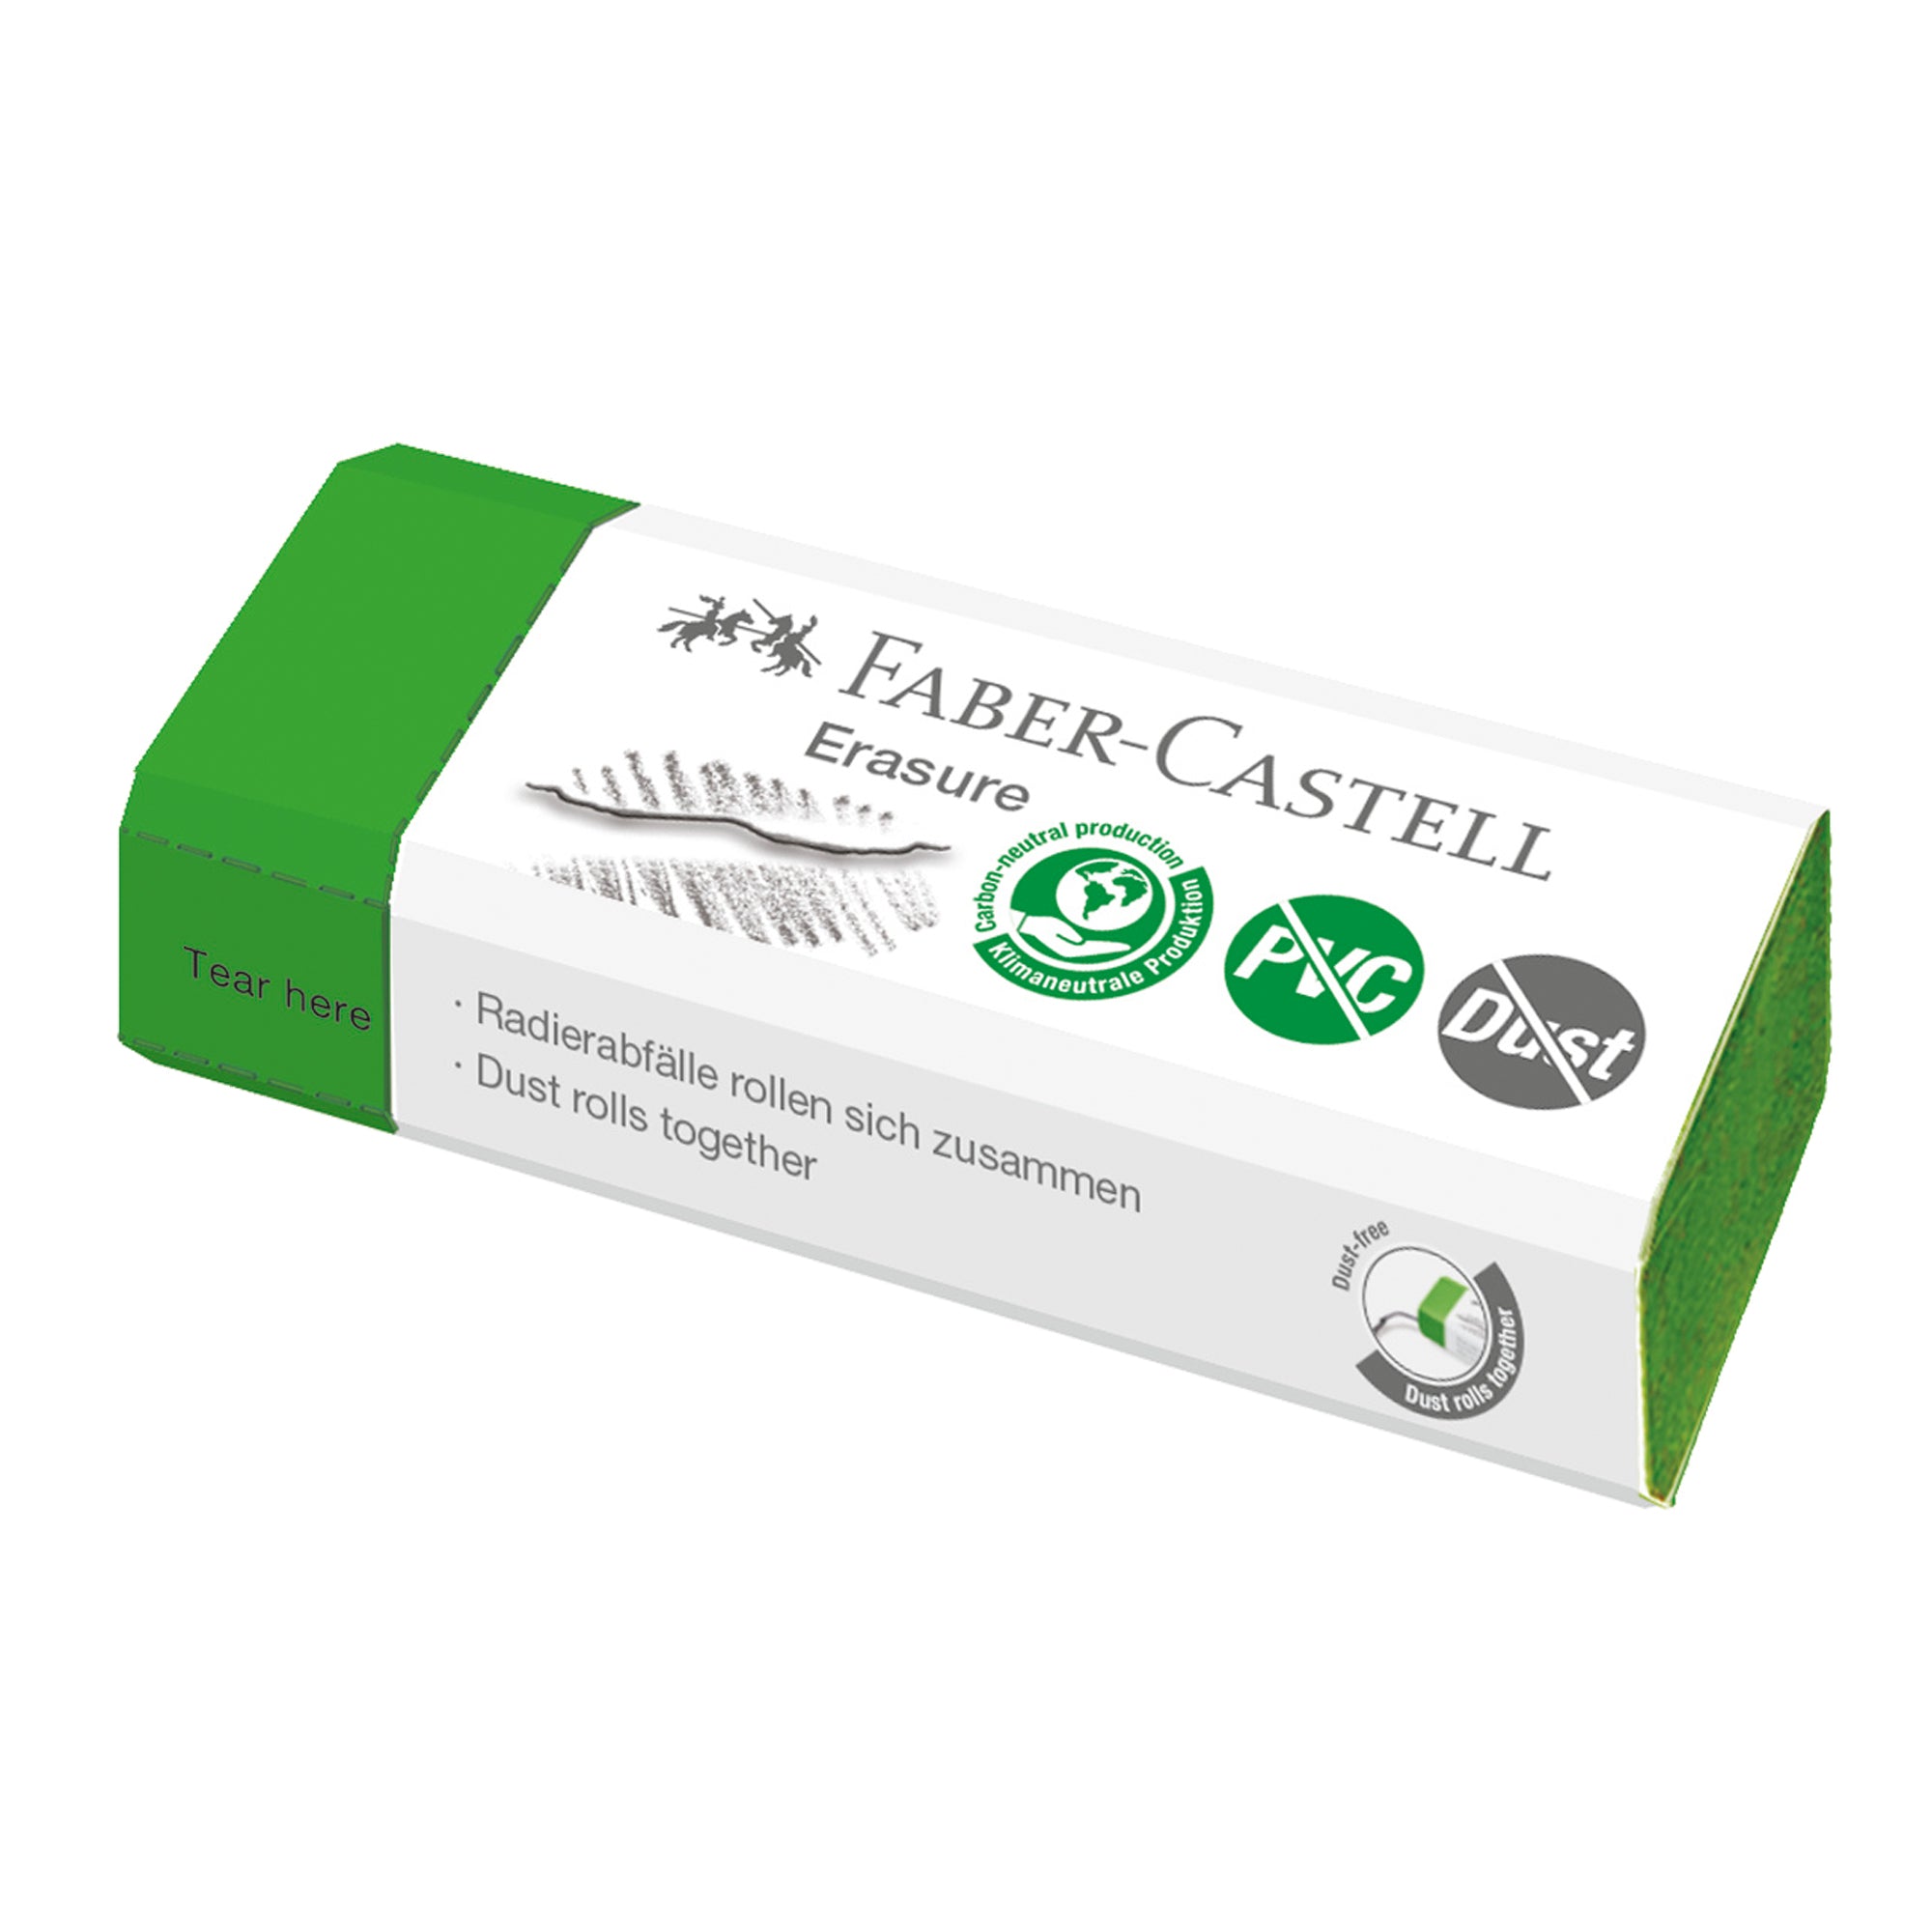 faber-castell-gomma-erasure-pvc-free-dust-free-faber-castell